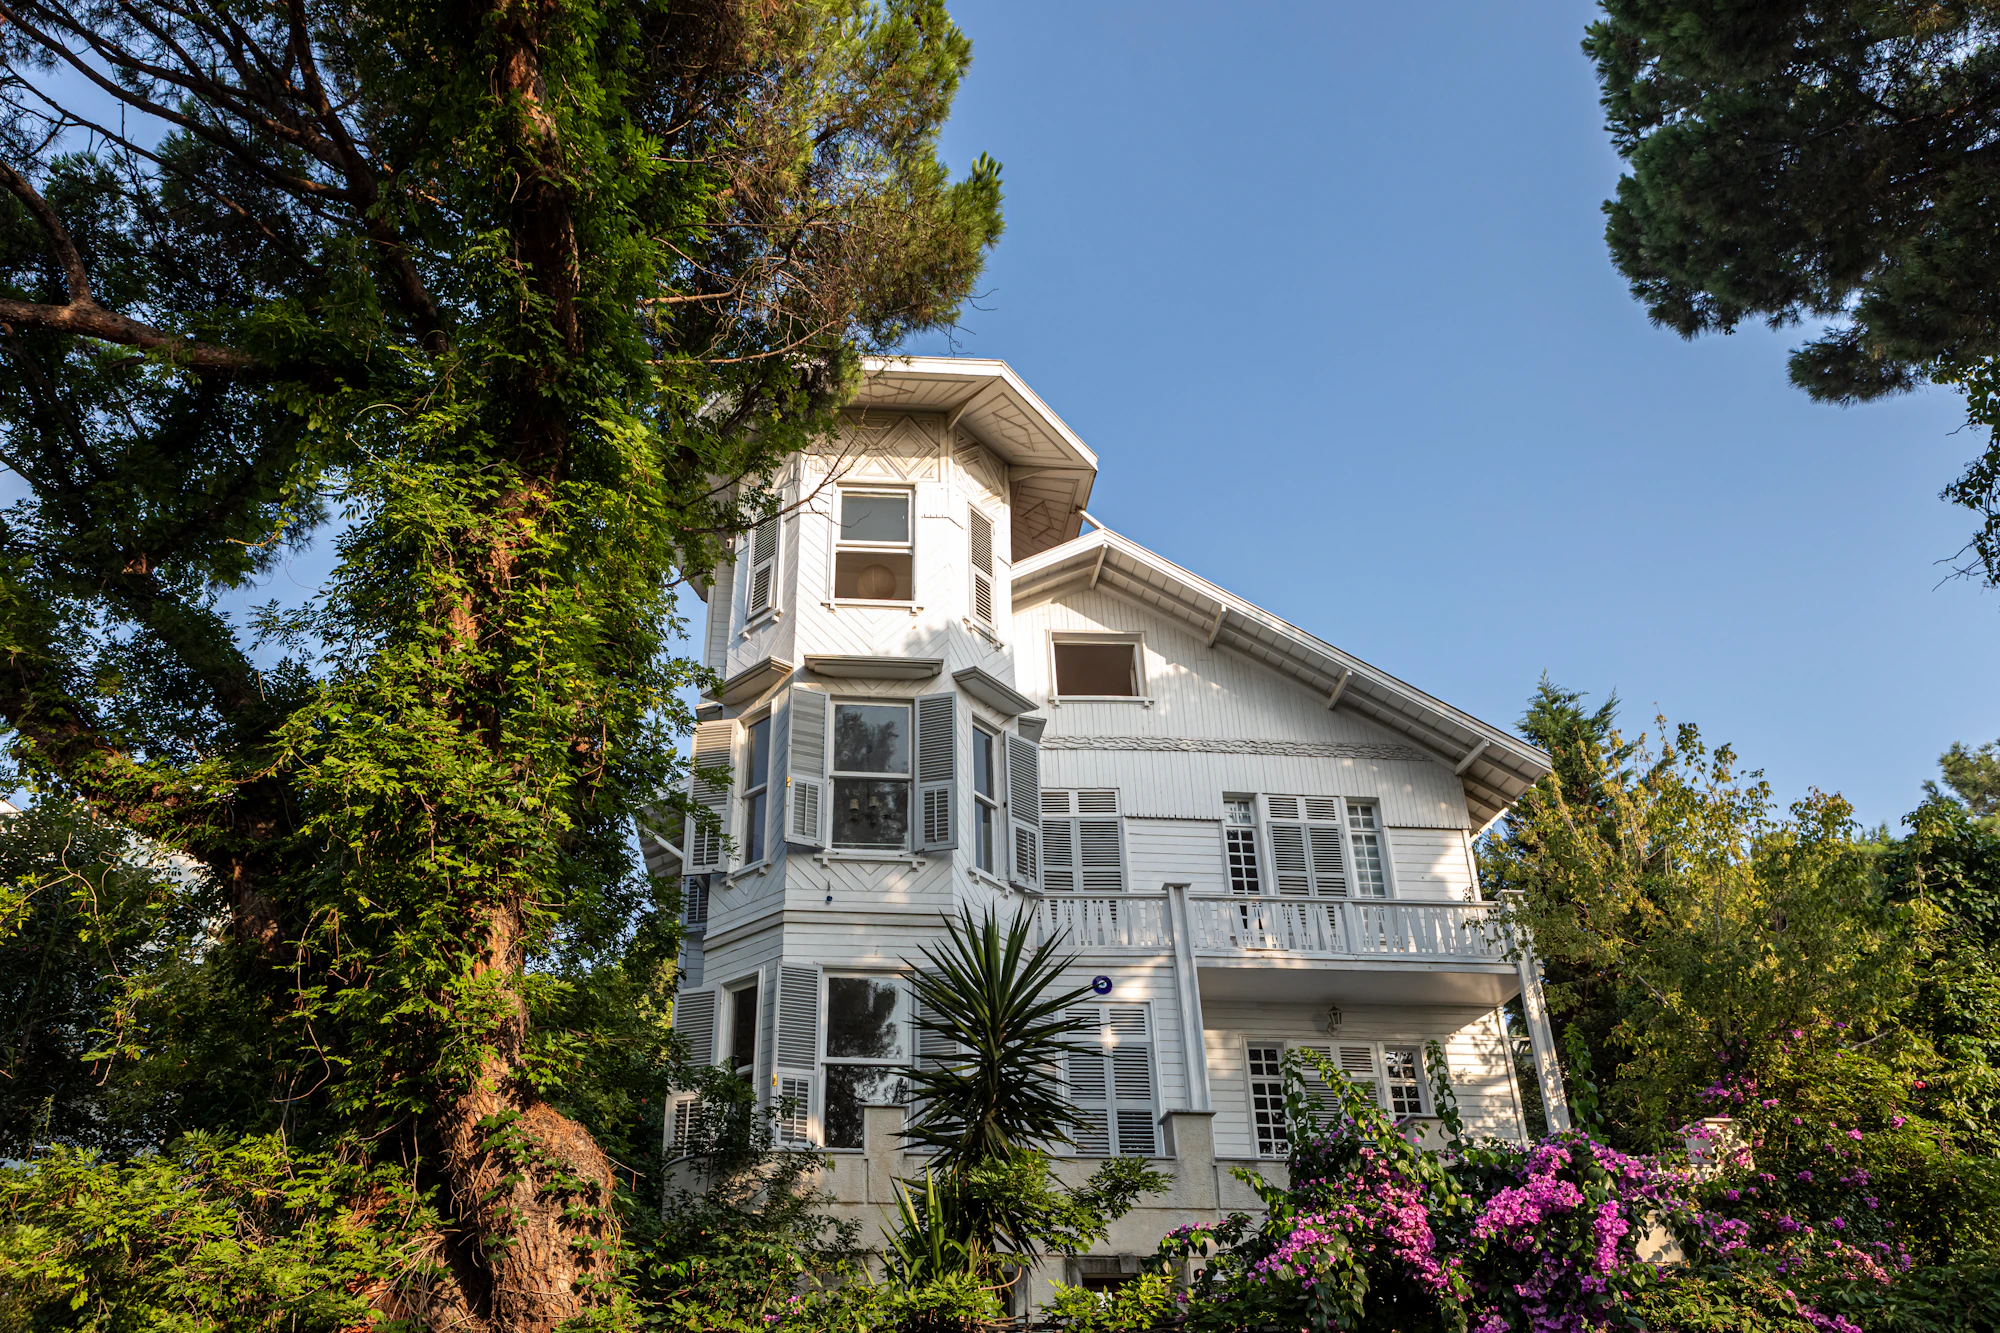 Surrounded by beautiful flowers and trees, the Turkish villa stands out.